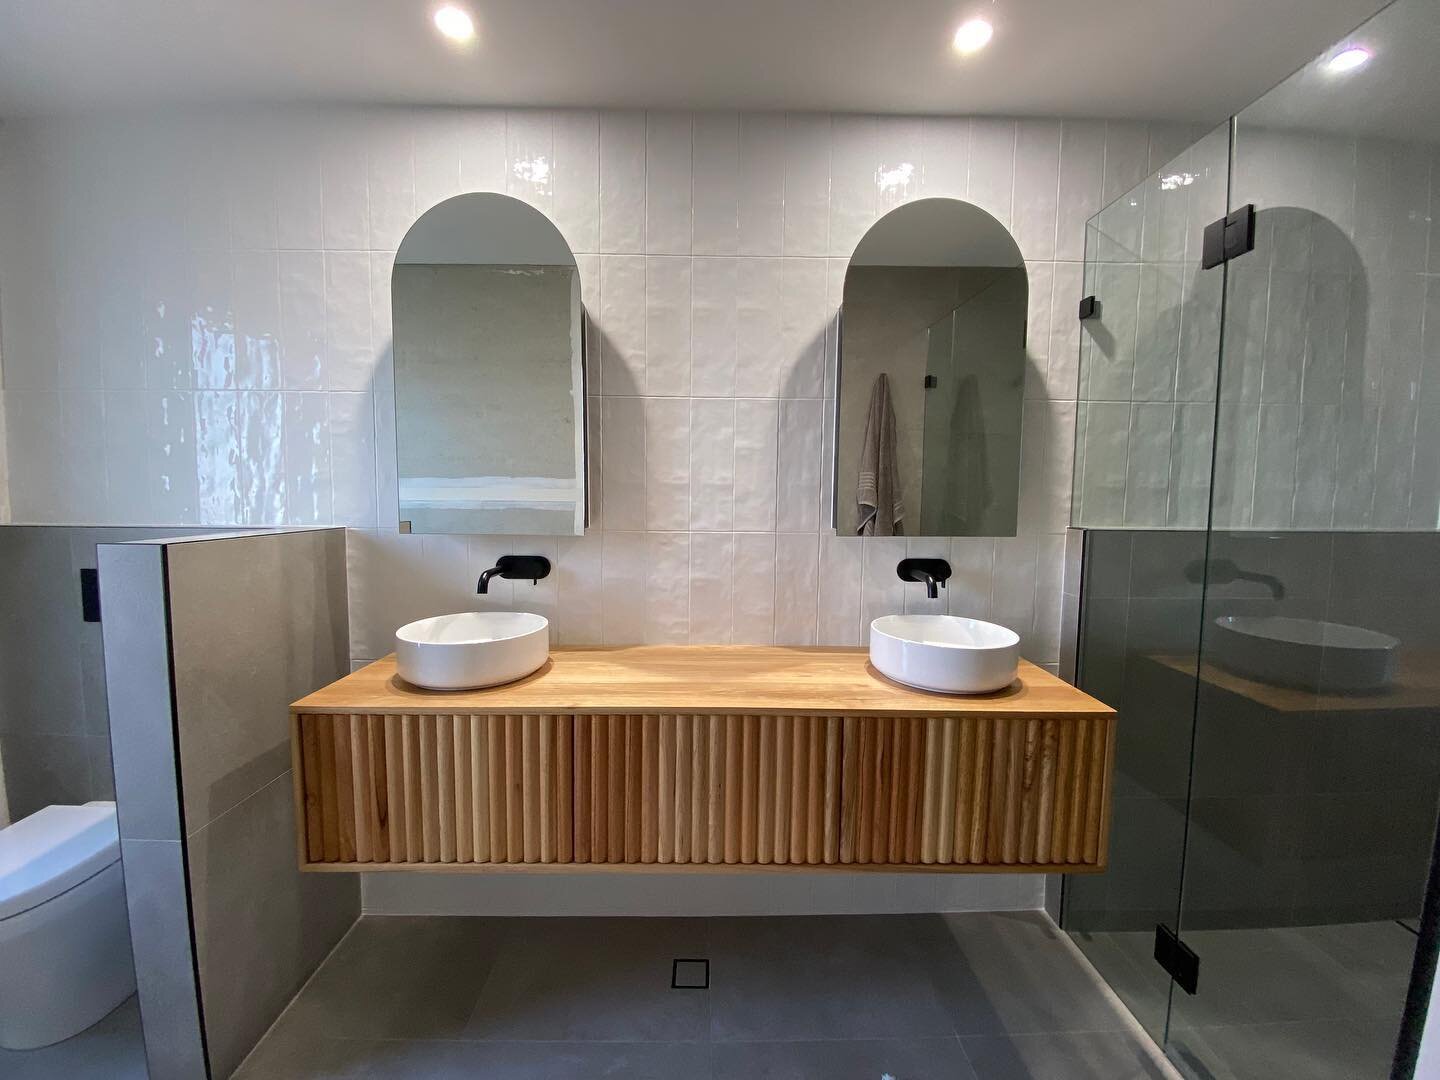 How stunning is this en-suite we recently completed. Thanks again to all of our trades and suppliers @hunter_valley_tile_solutions @beaumont.tiles @reeceplumbing @harveynormancommercial @ingraindesigns @novateam_australia @joshbergs @nhs.trade @mcnam